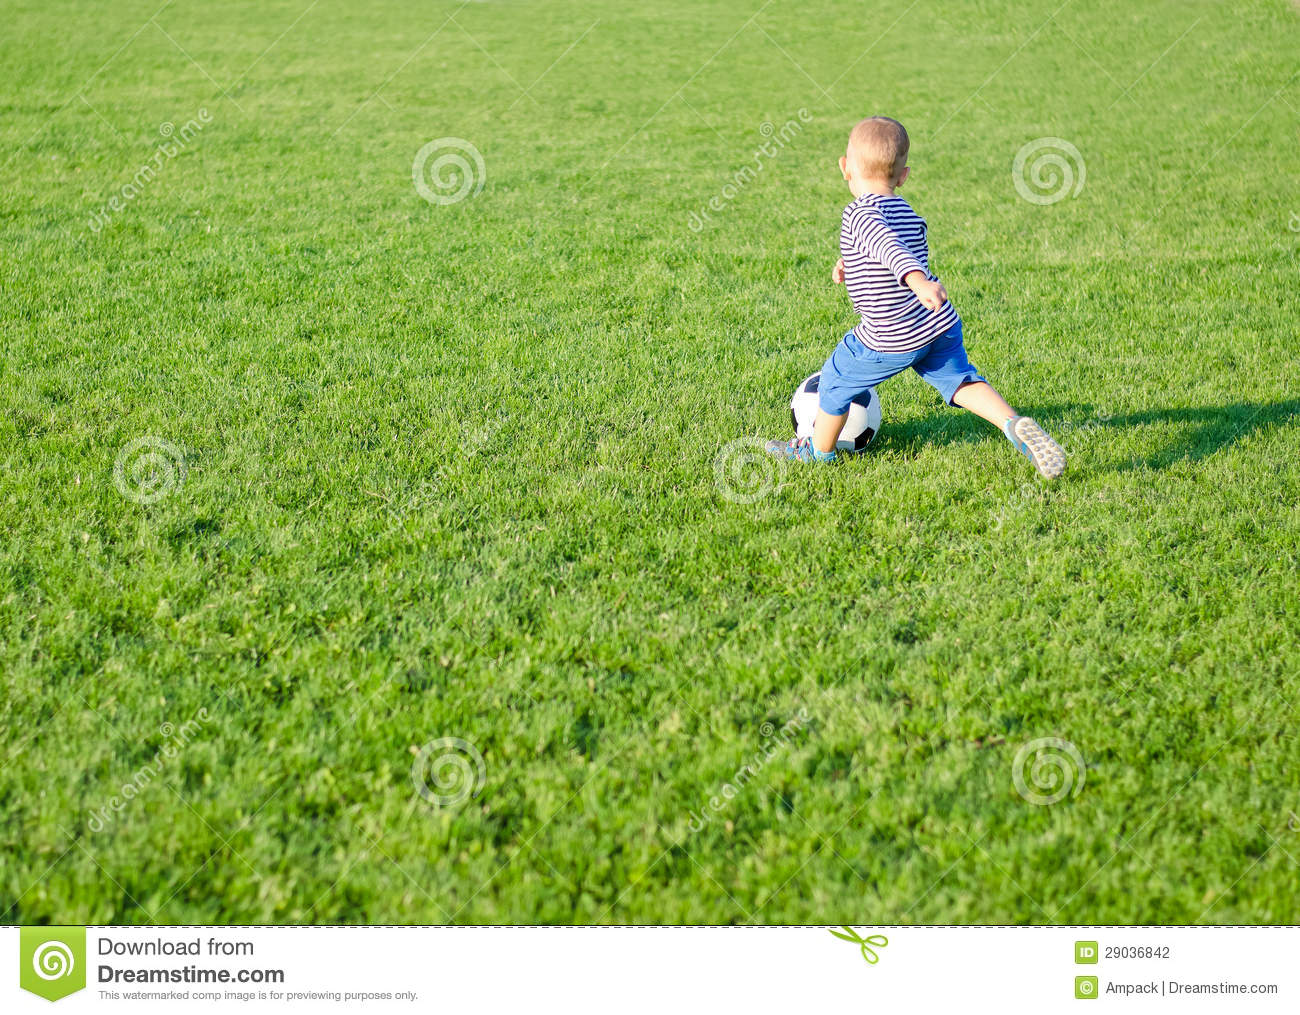 Grassy Sportsfield Dribbling The Ball Alongside Him With Copyspace